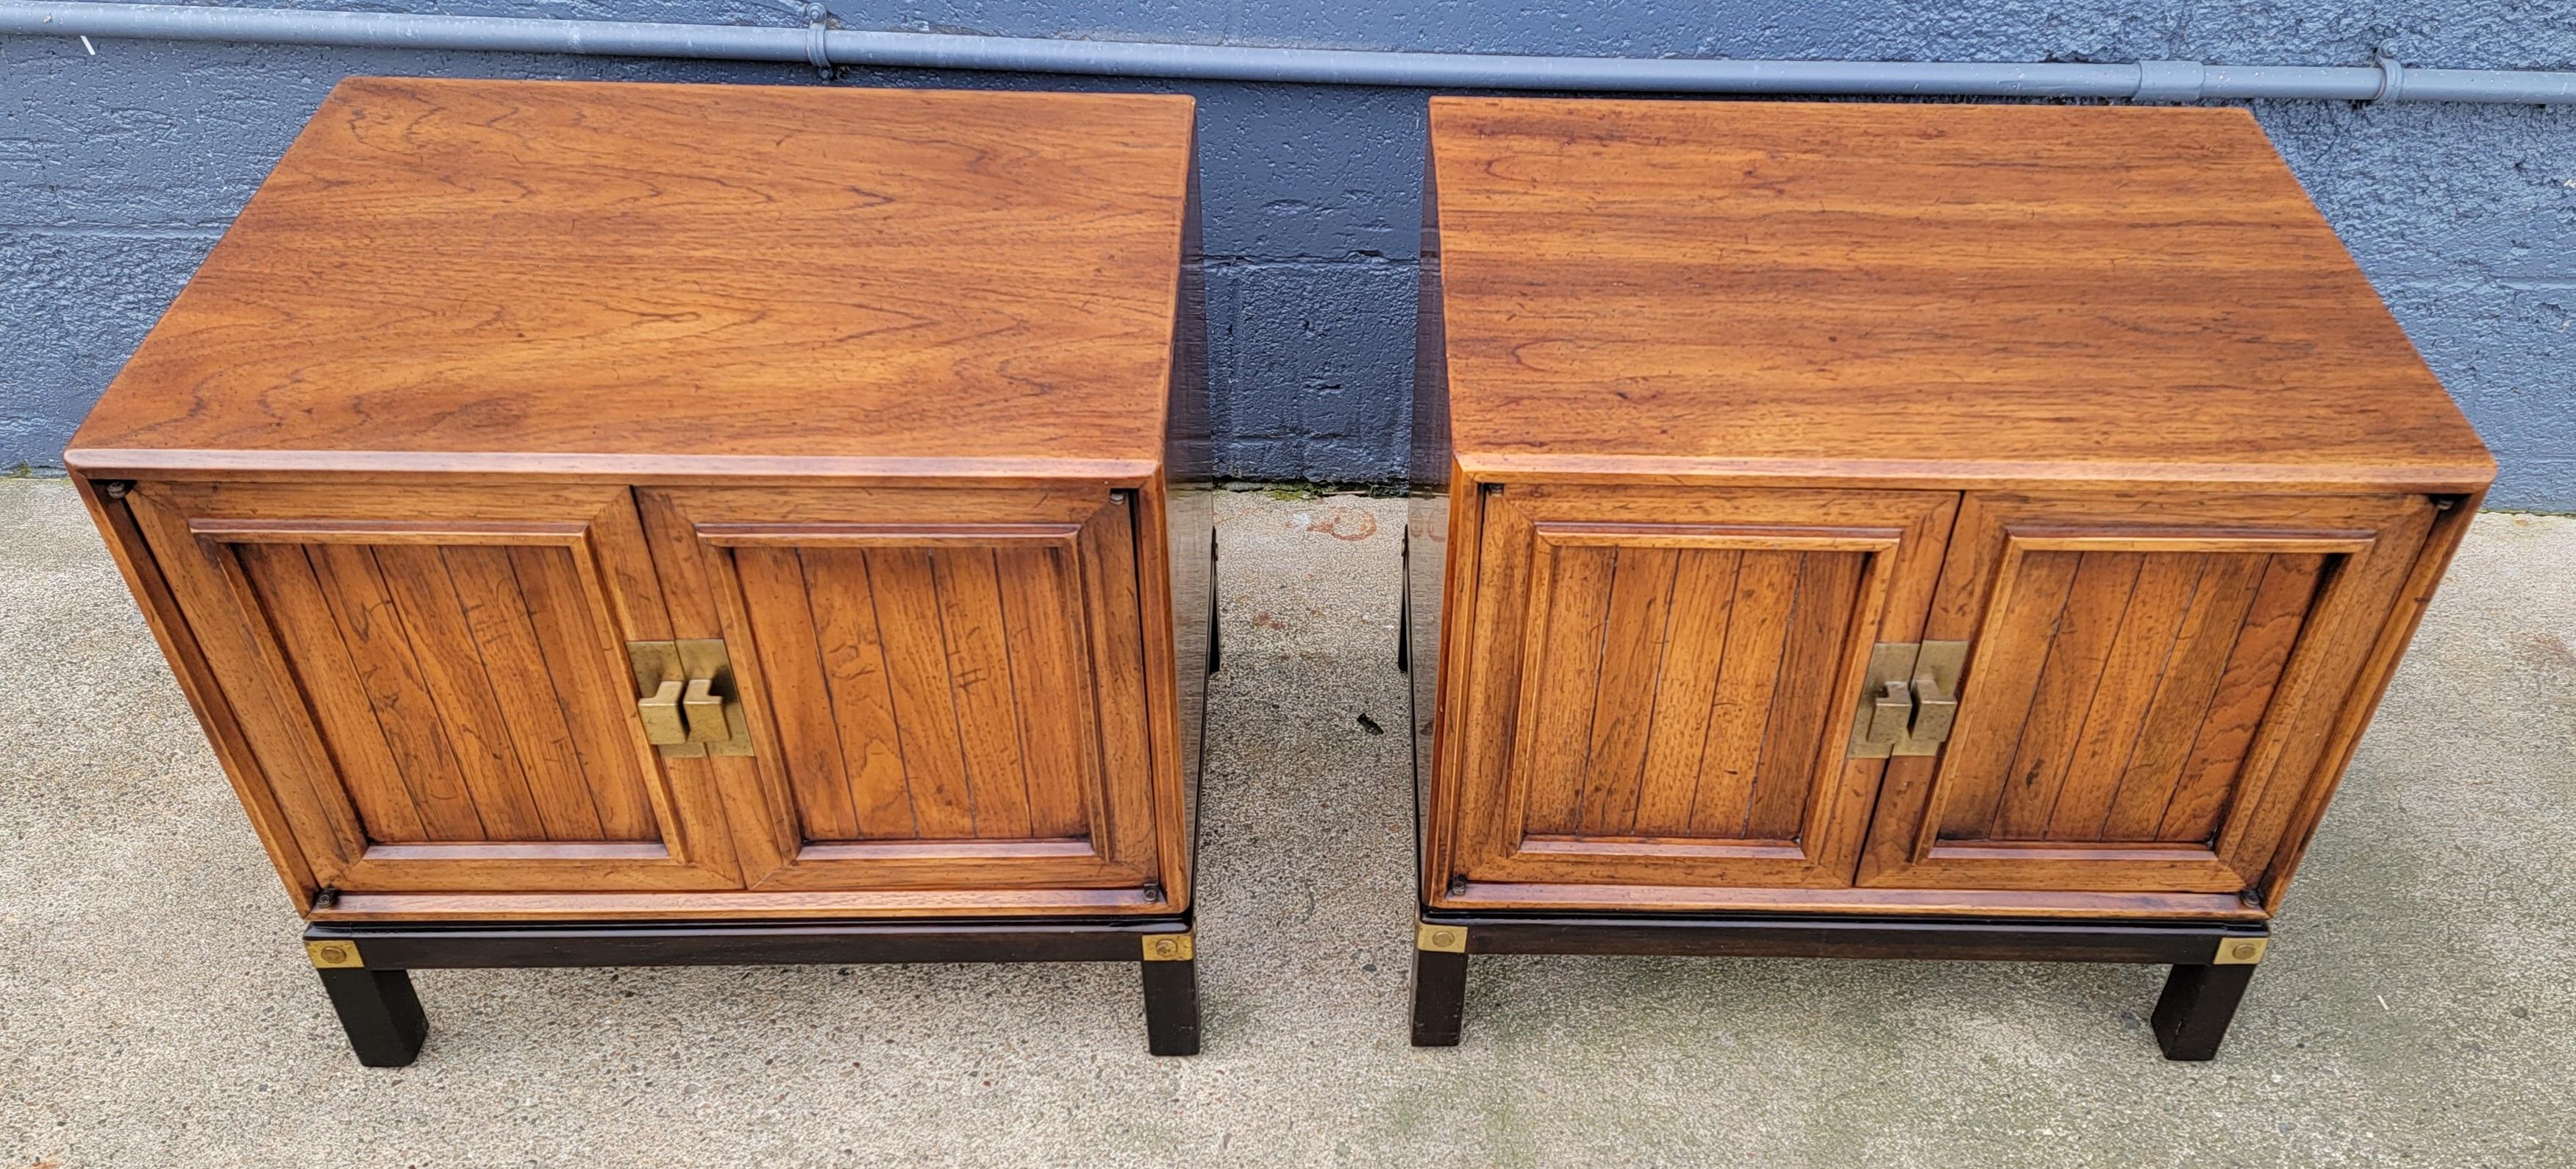 A fine pair of nightstands by Henredon. Superior craftsmanship and materials. Original finish in excellent condition. Double doors reveal set-back interior shelf. Solid brass mounts and pulls. Measurements are for each nightstand.